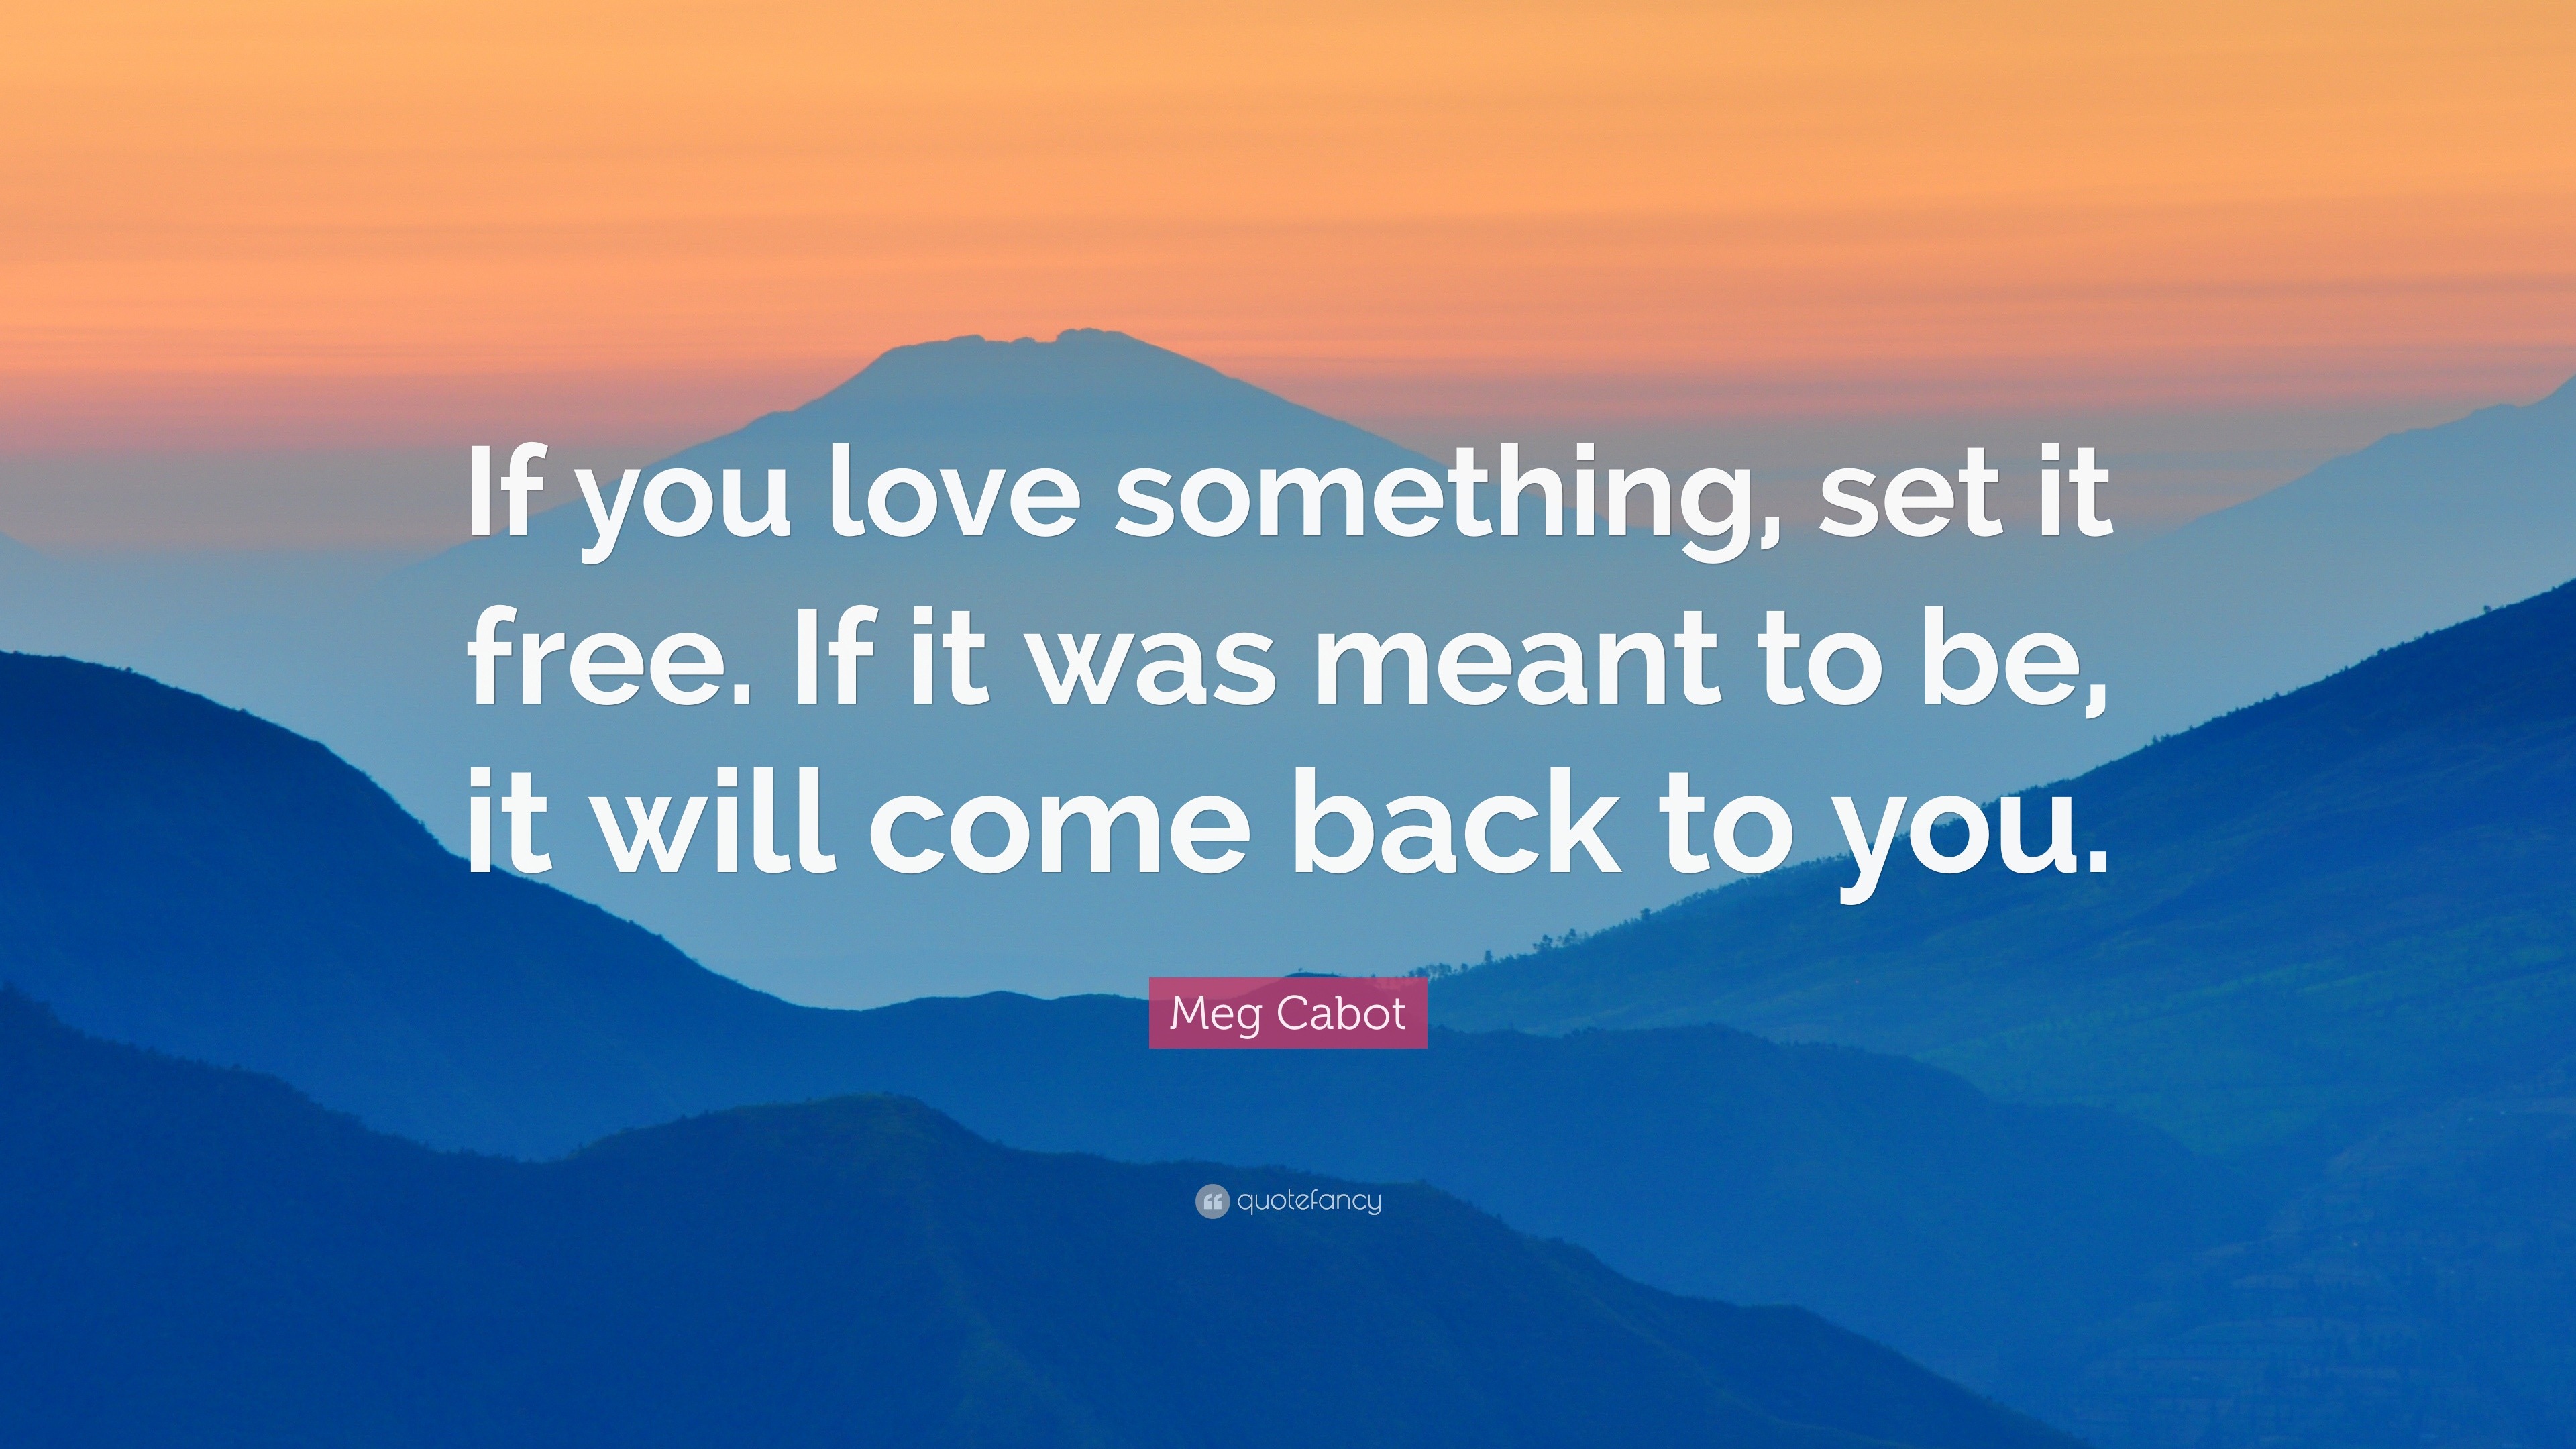 Meg Cabot Quote “If you love something set it free If it